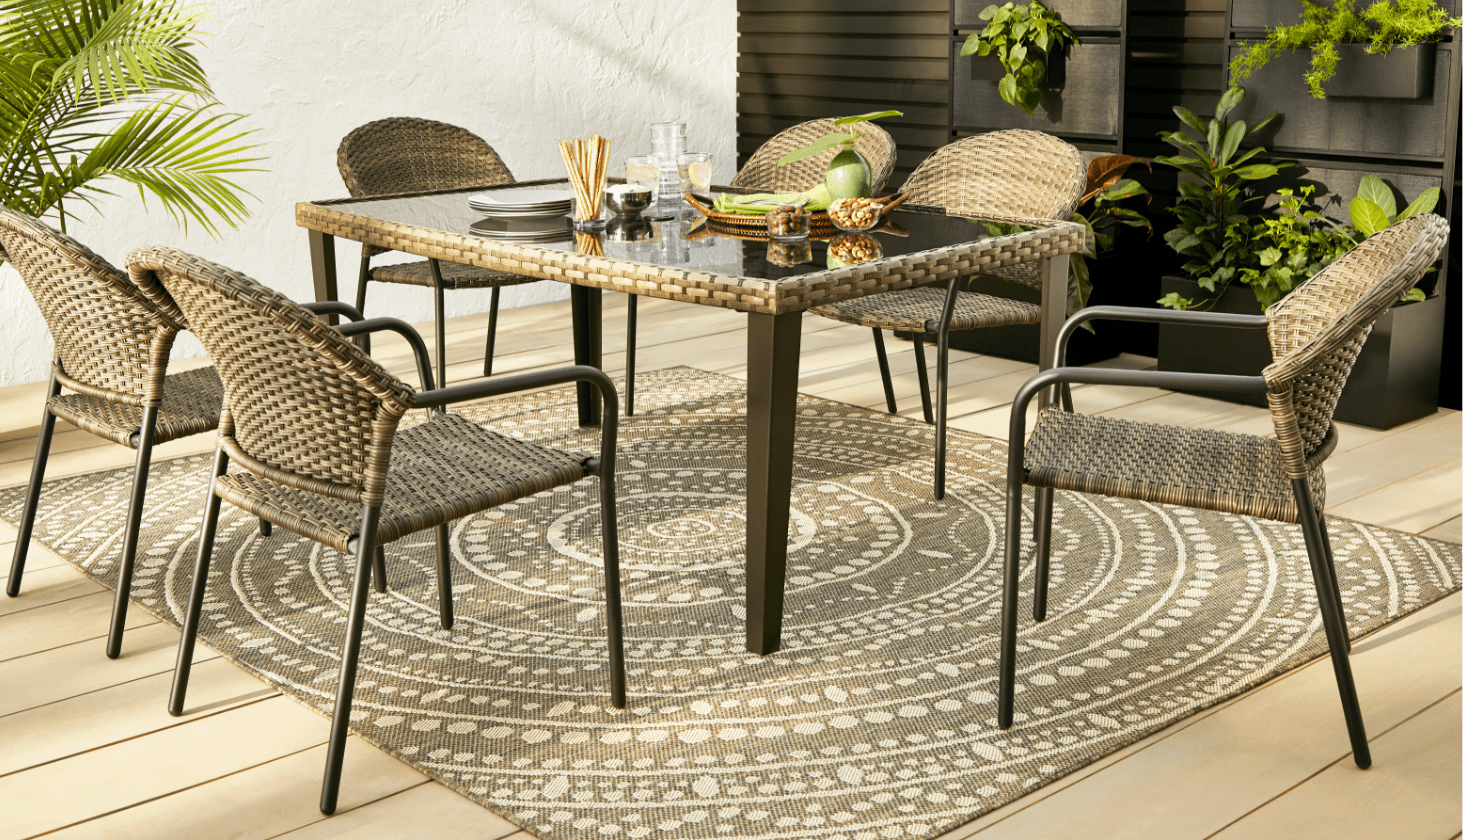 CANVAS Breton Dining Table on backyard patio with 6 wicker bistro dining chairs.